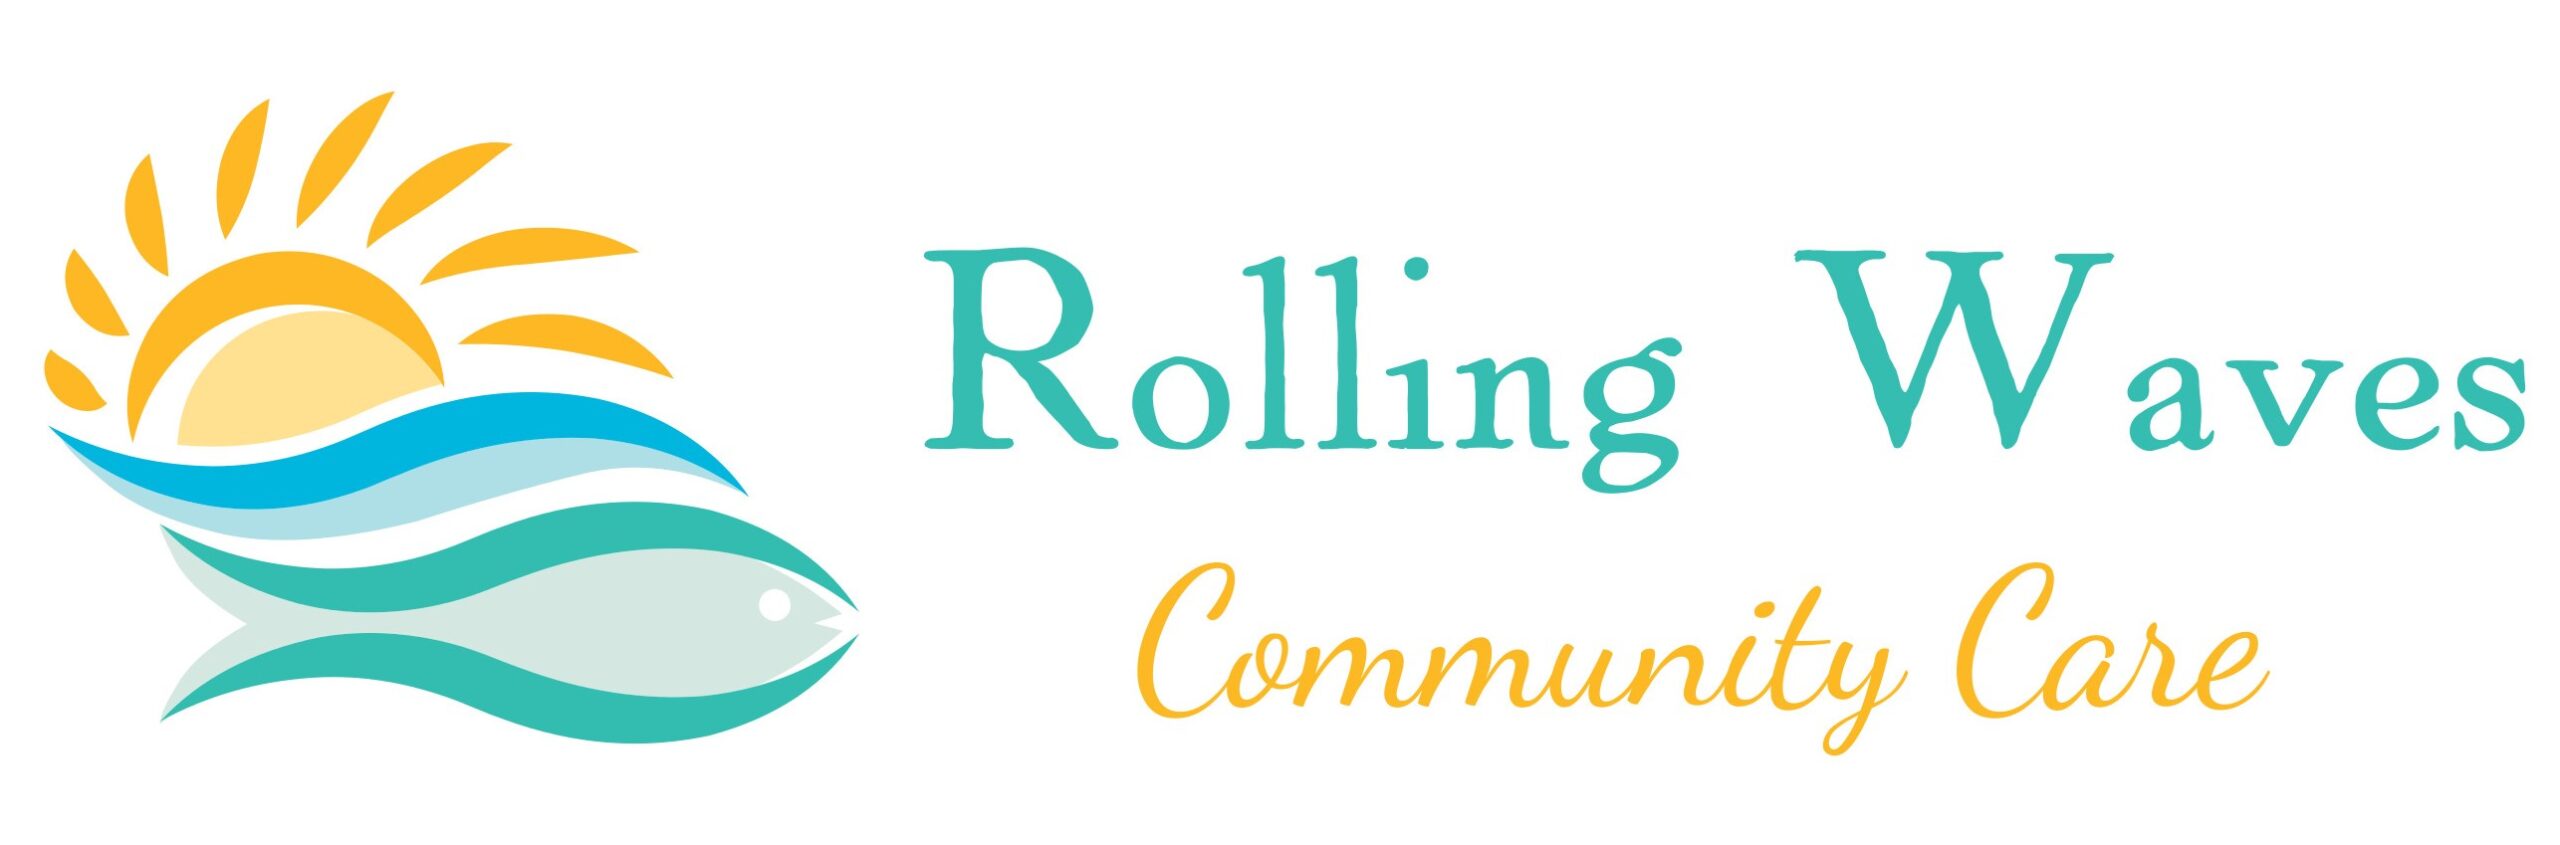 Rolling Waves Community Care